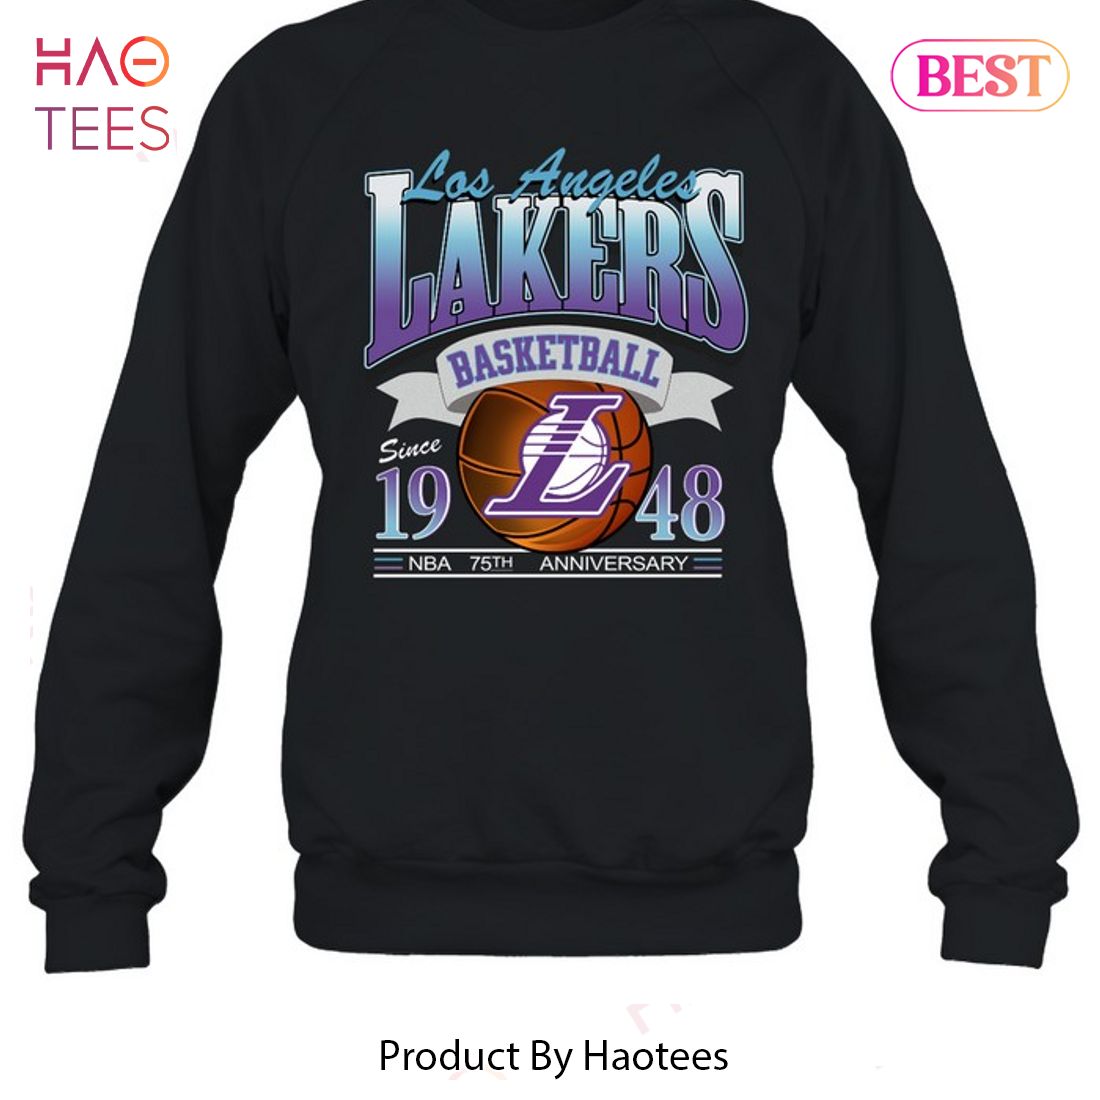 Los Angeles Lakers Basketball Since 1948 Unisex T-Shirt